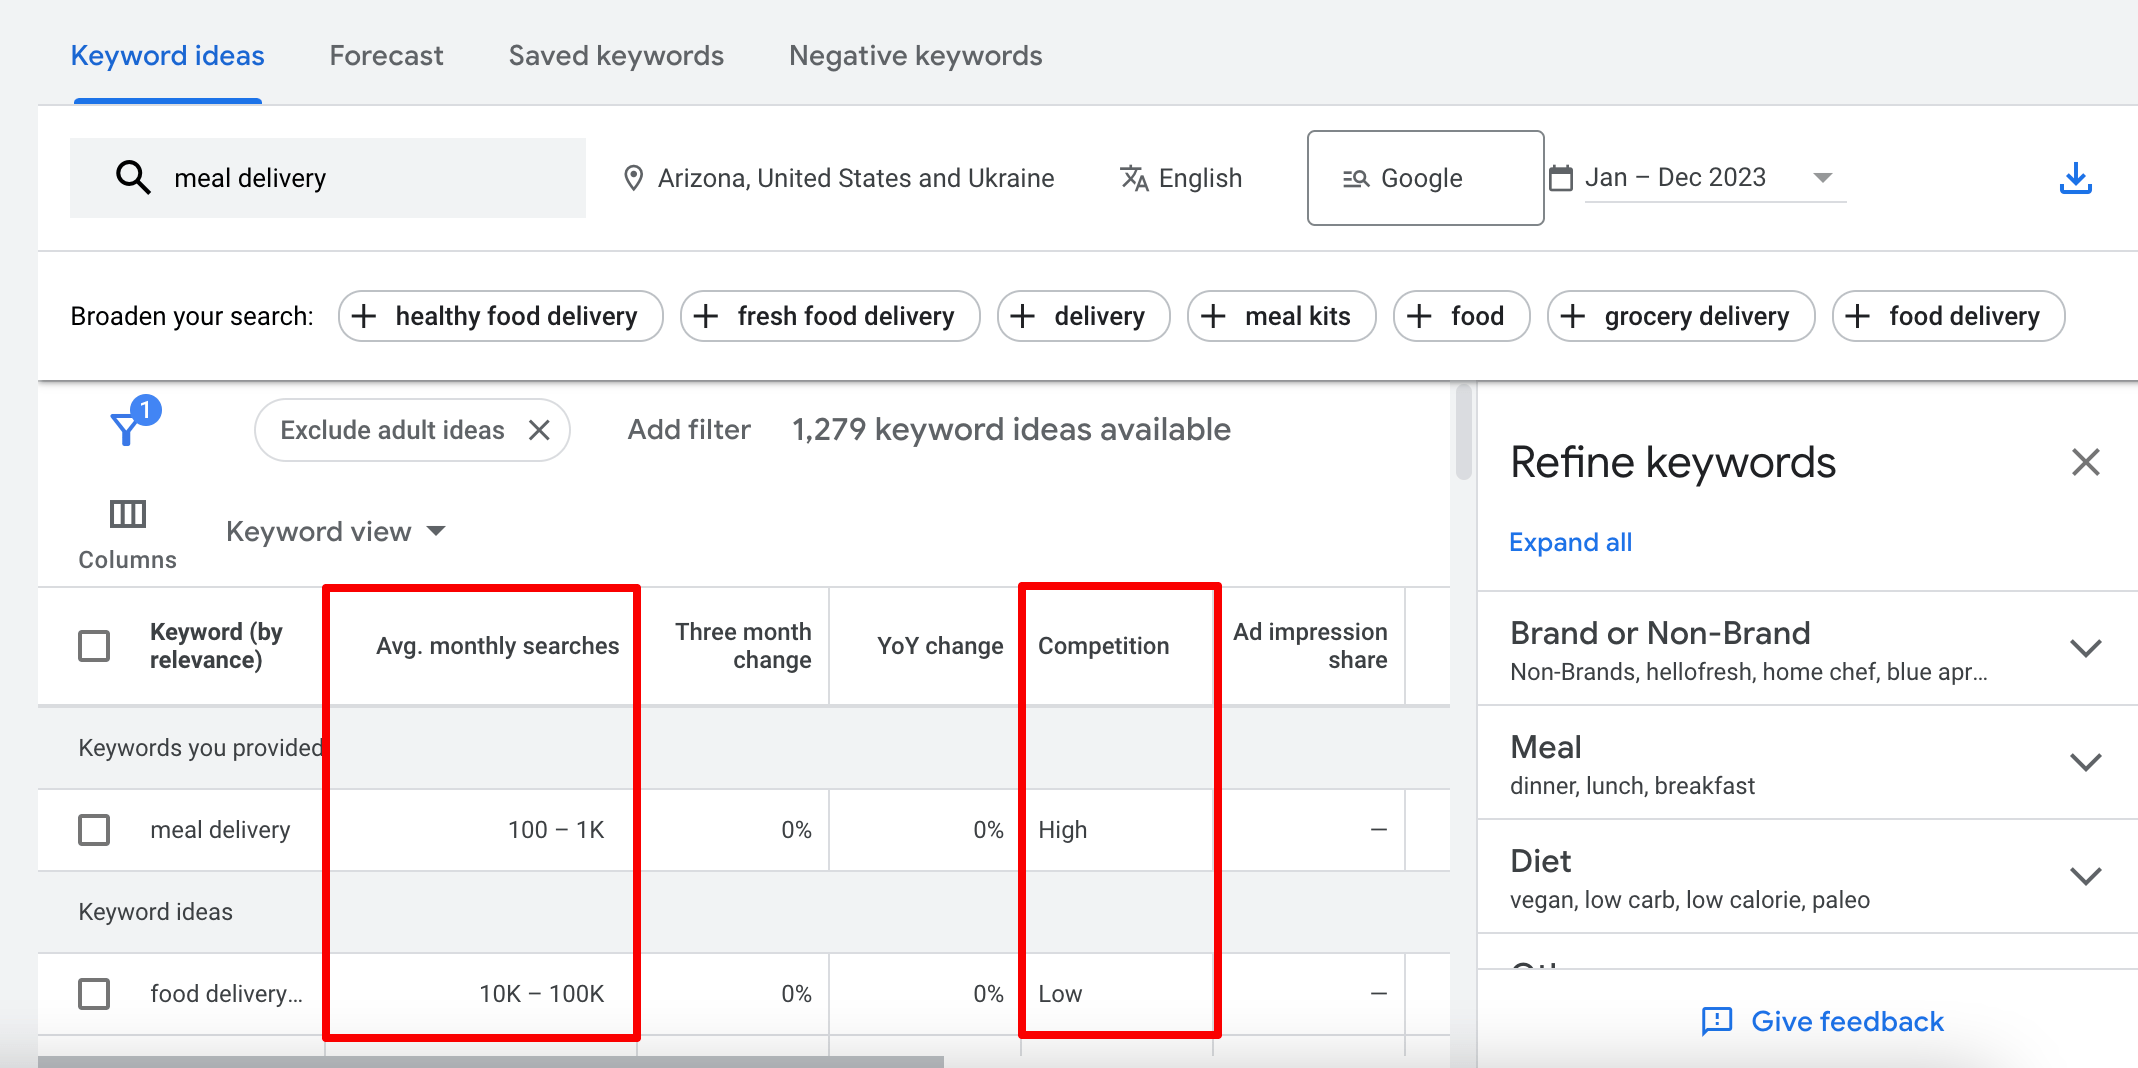 How to get monthly search volumes for keywords in Google Keyword Planner